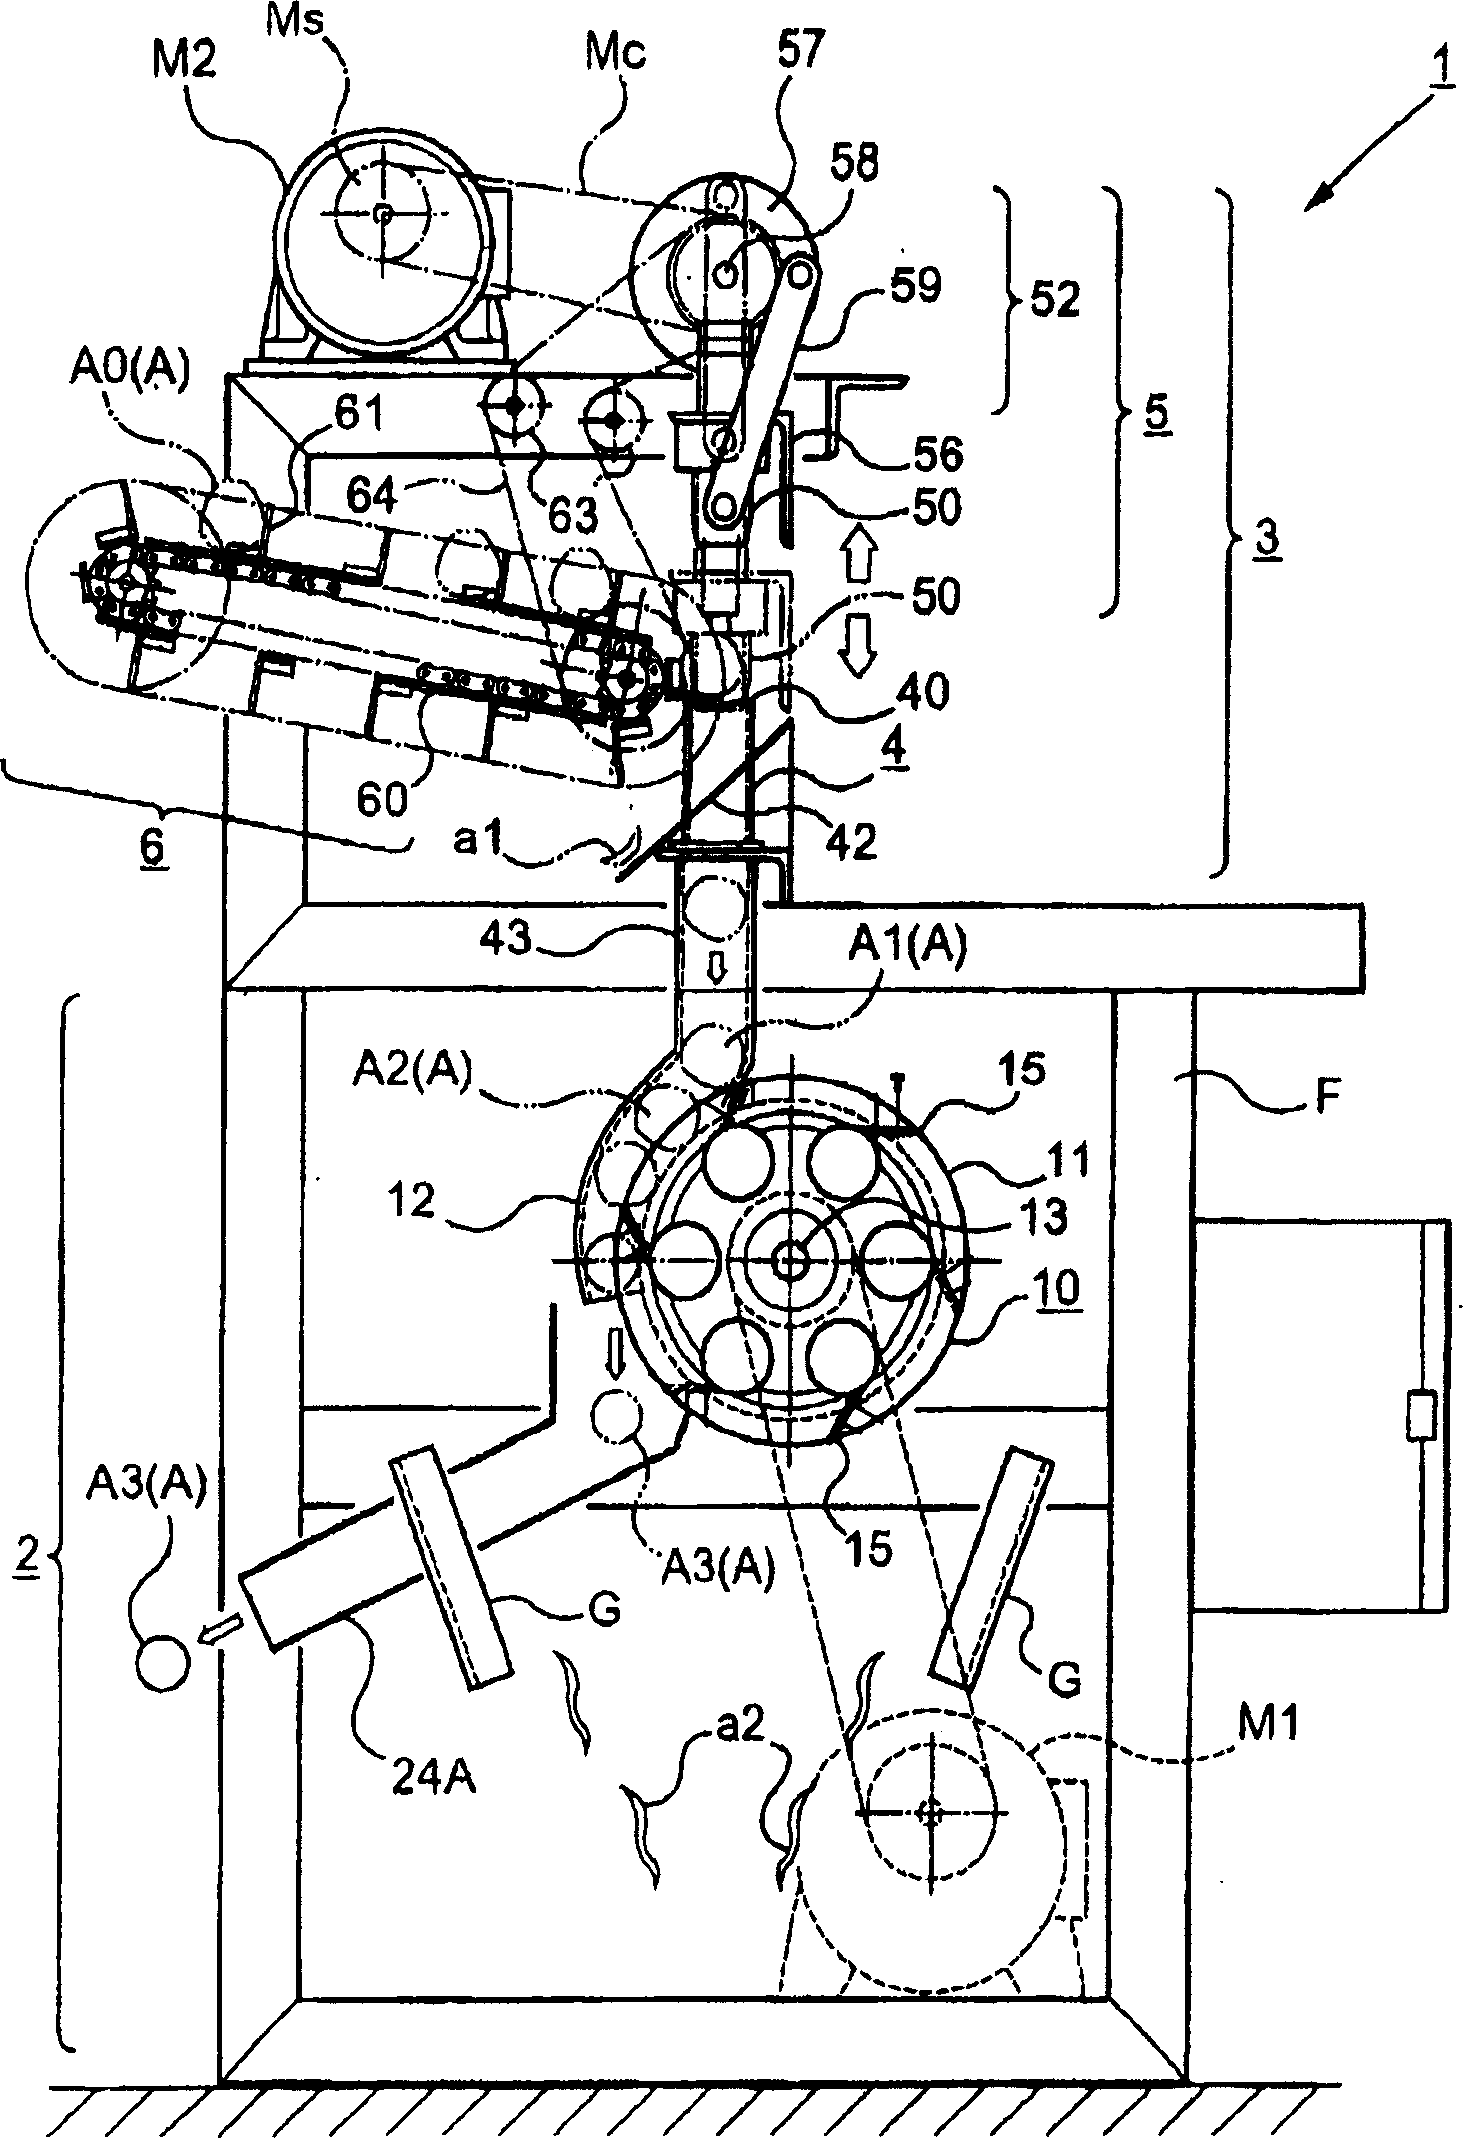 Method and device for shaping foodstuffs and the like, and shaped product